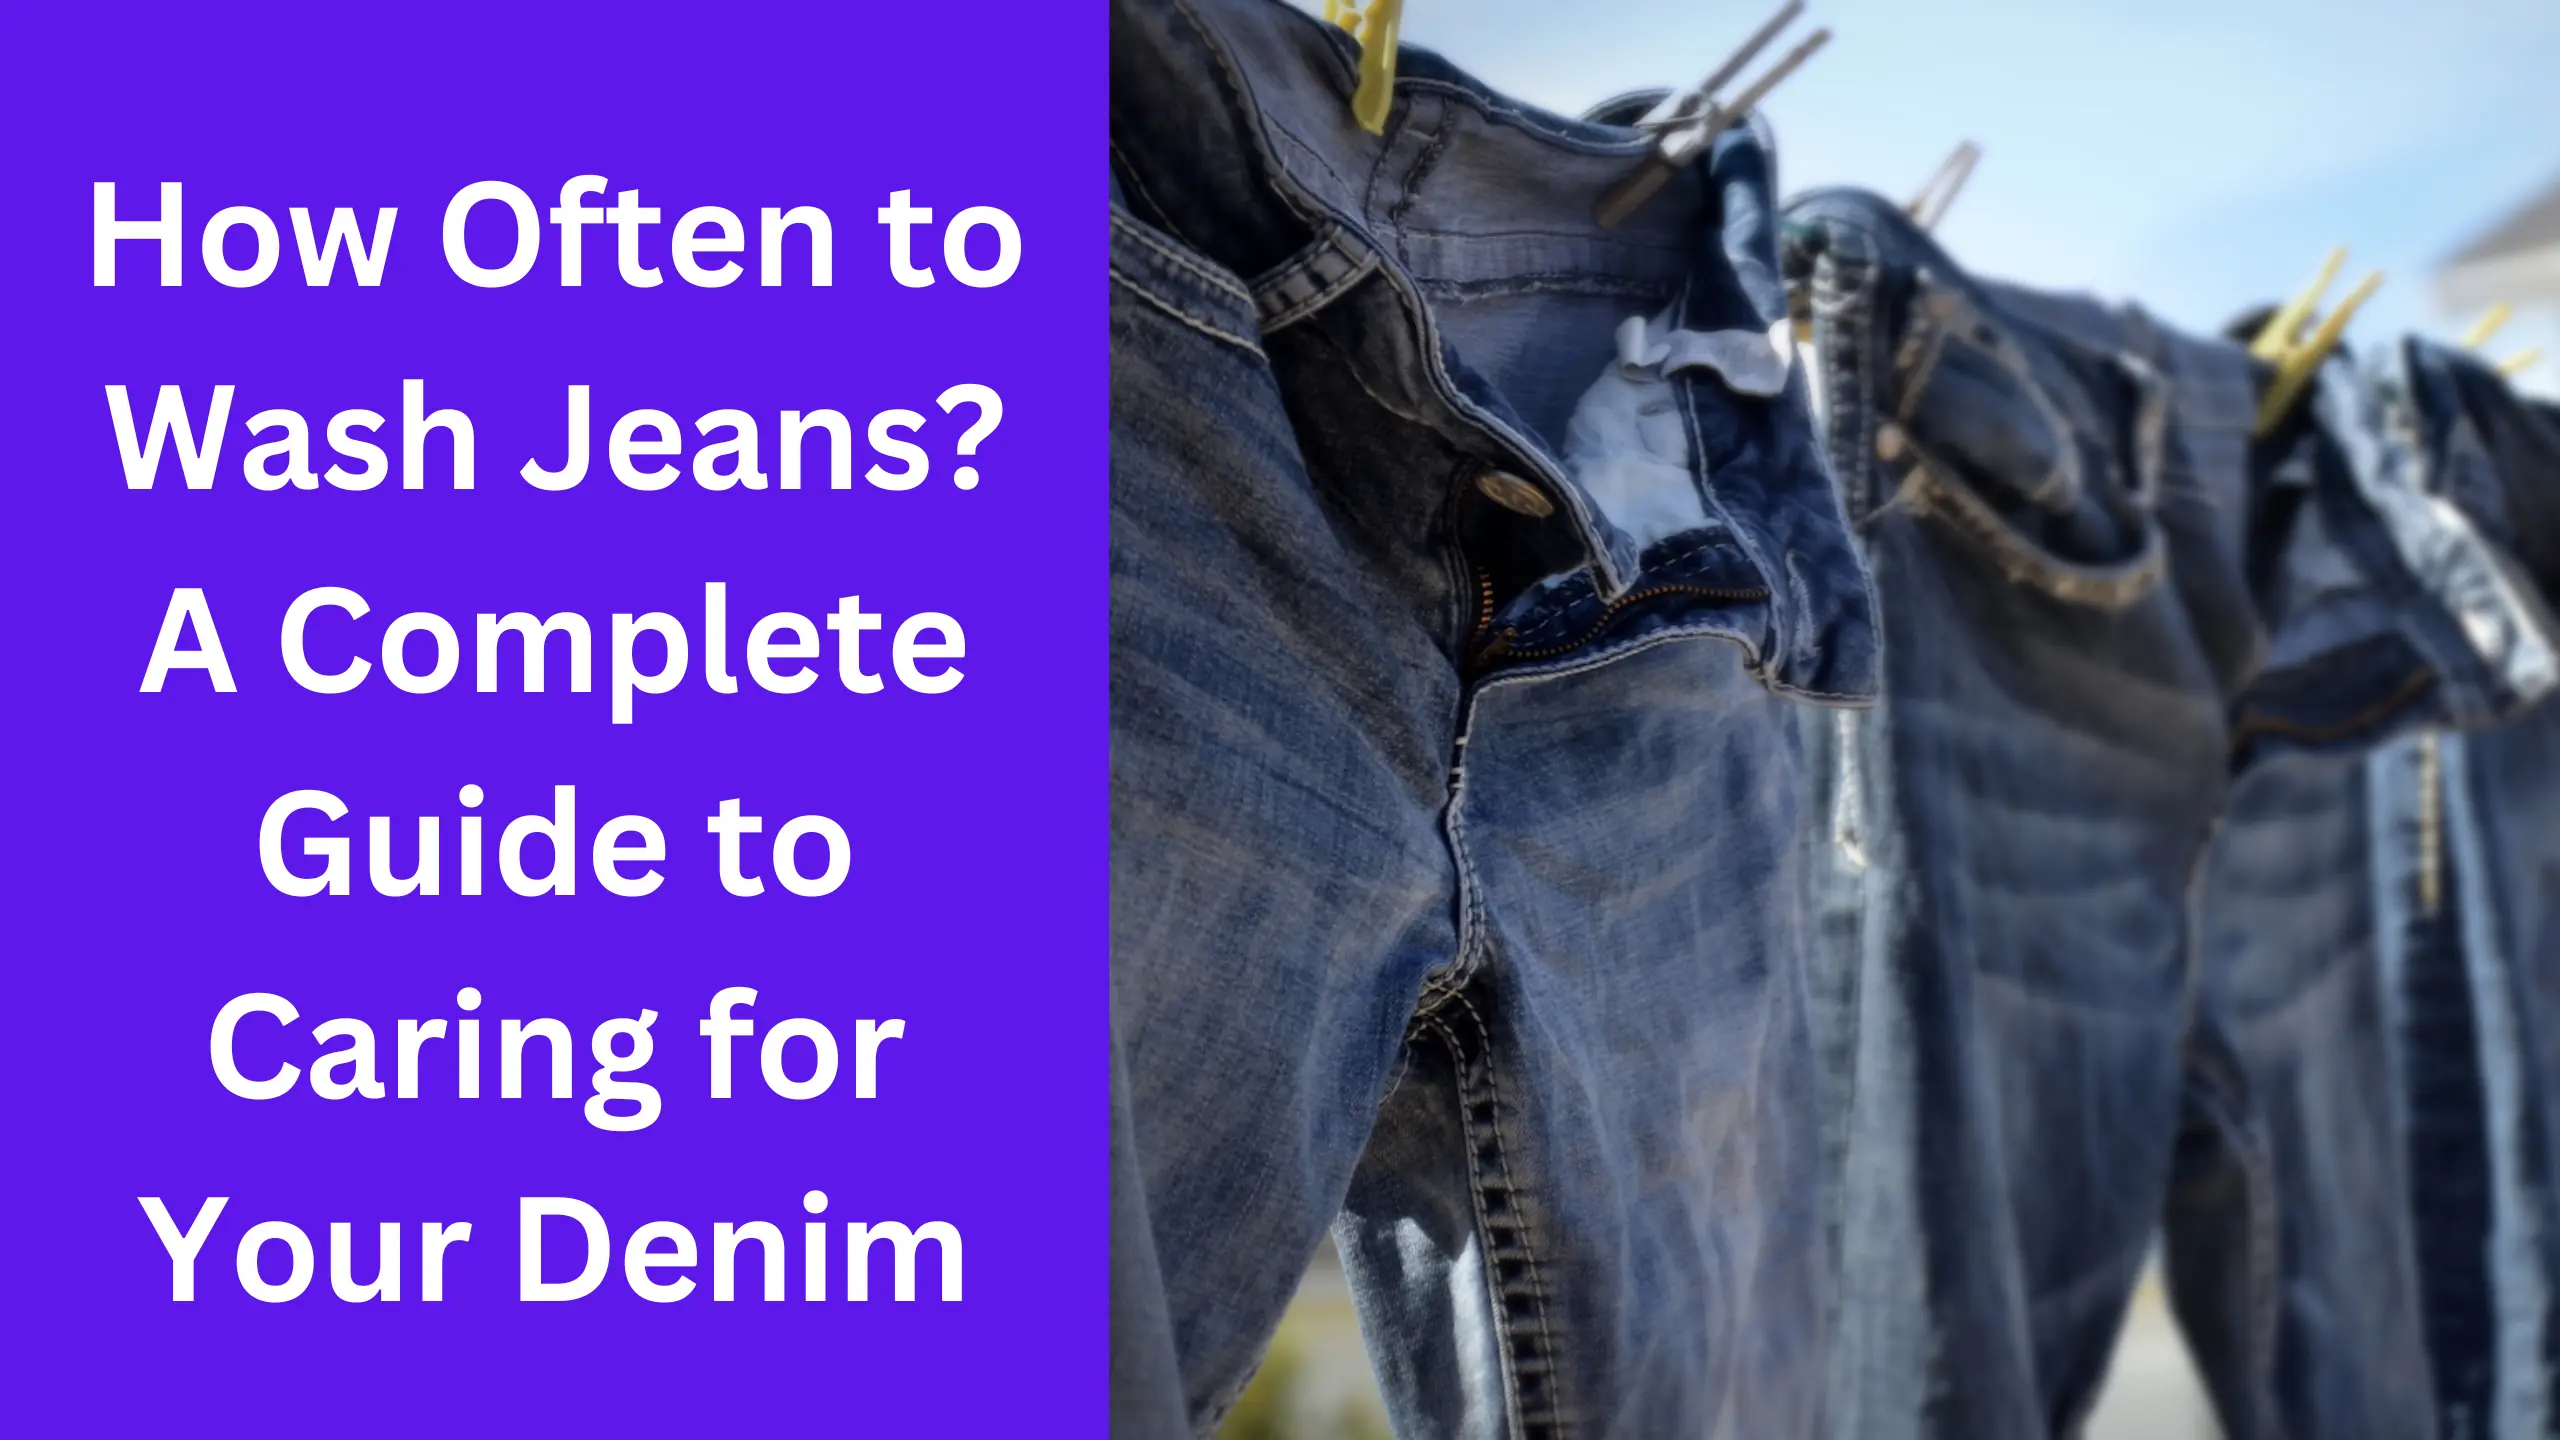 How Often to Wash Jeans A Complete Guide to Caring for Your Denim